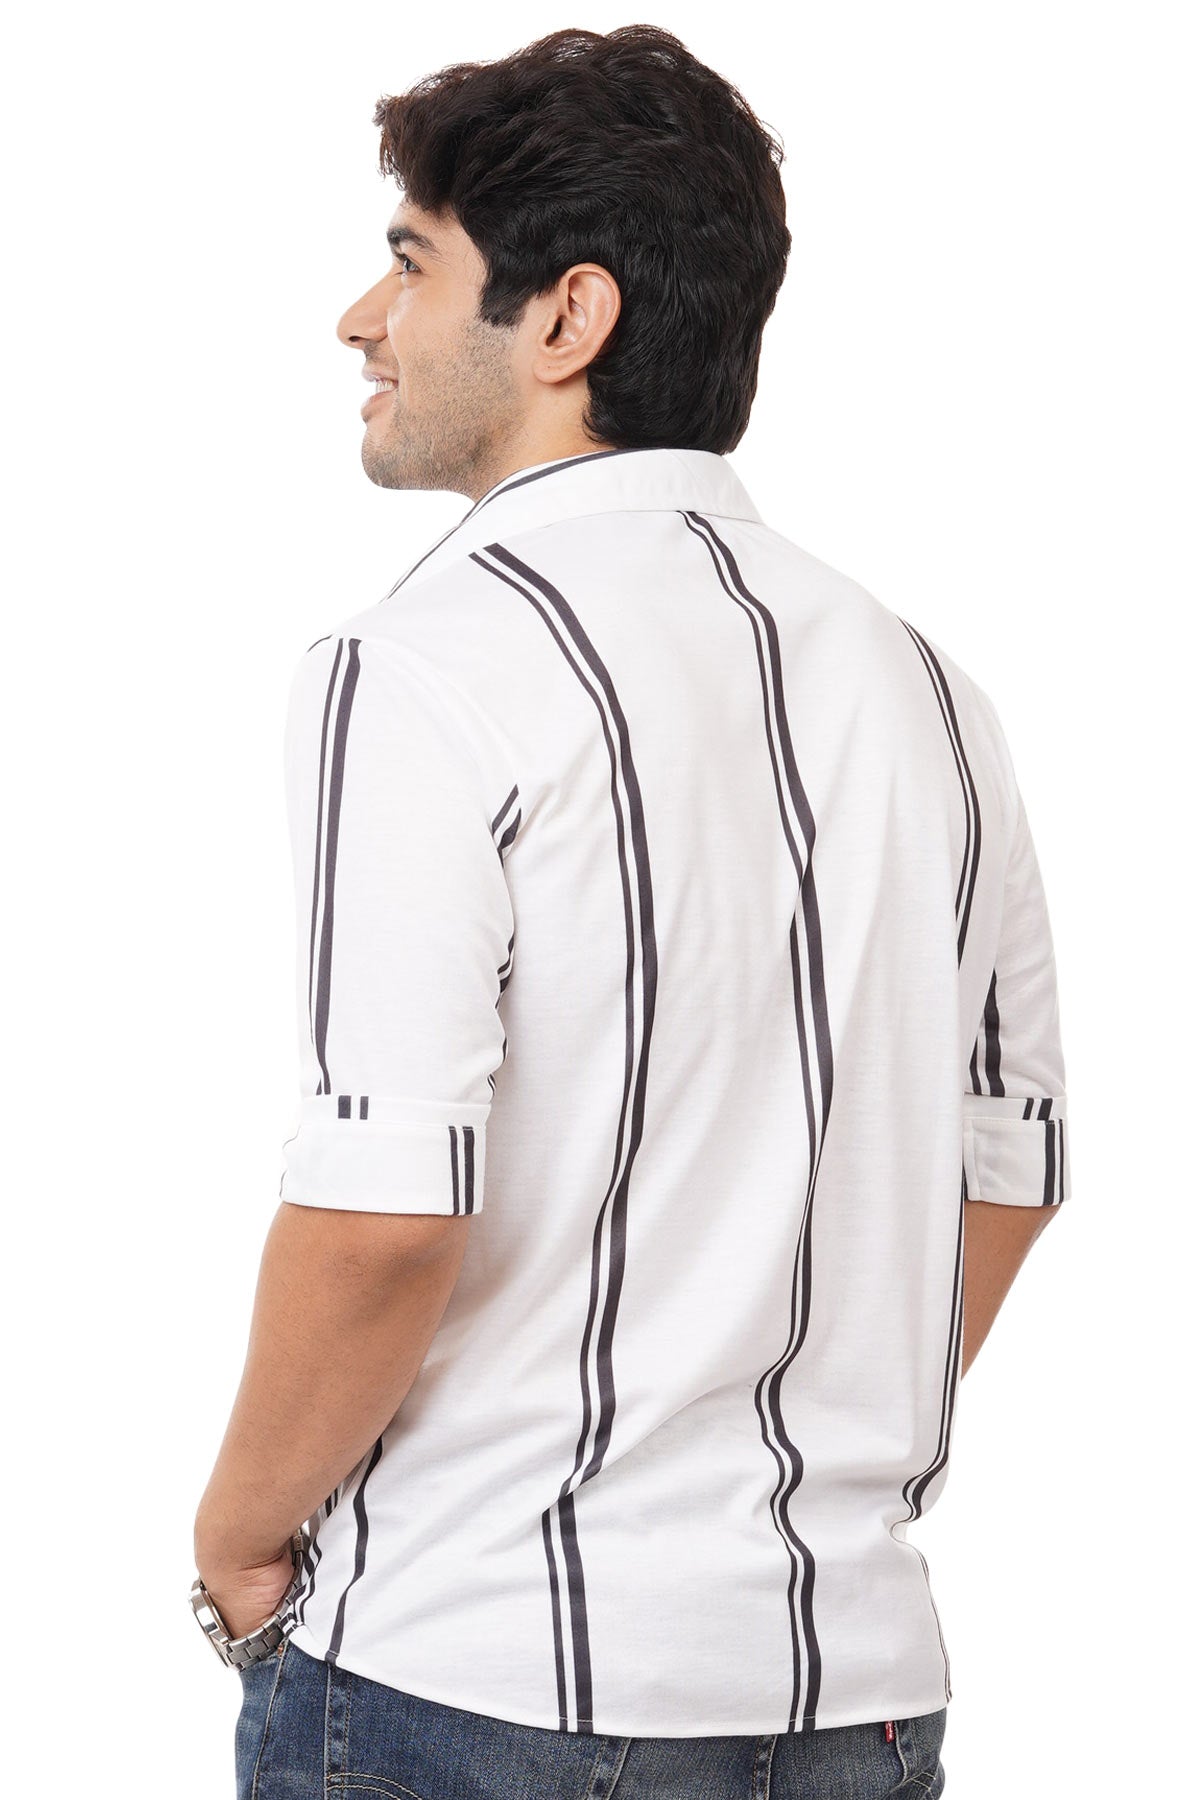 White with Black Vertical Stripes Regular Fit Shirtee